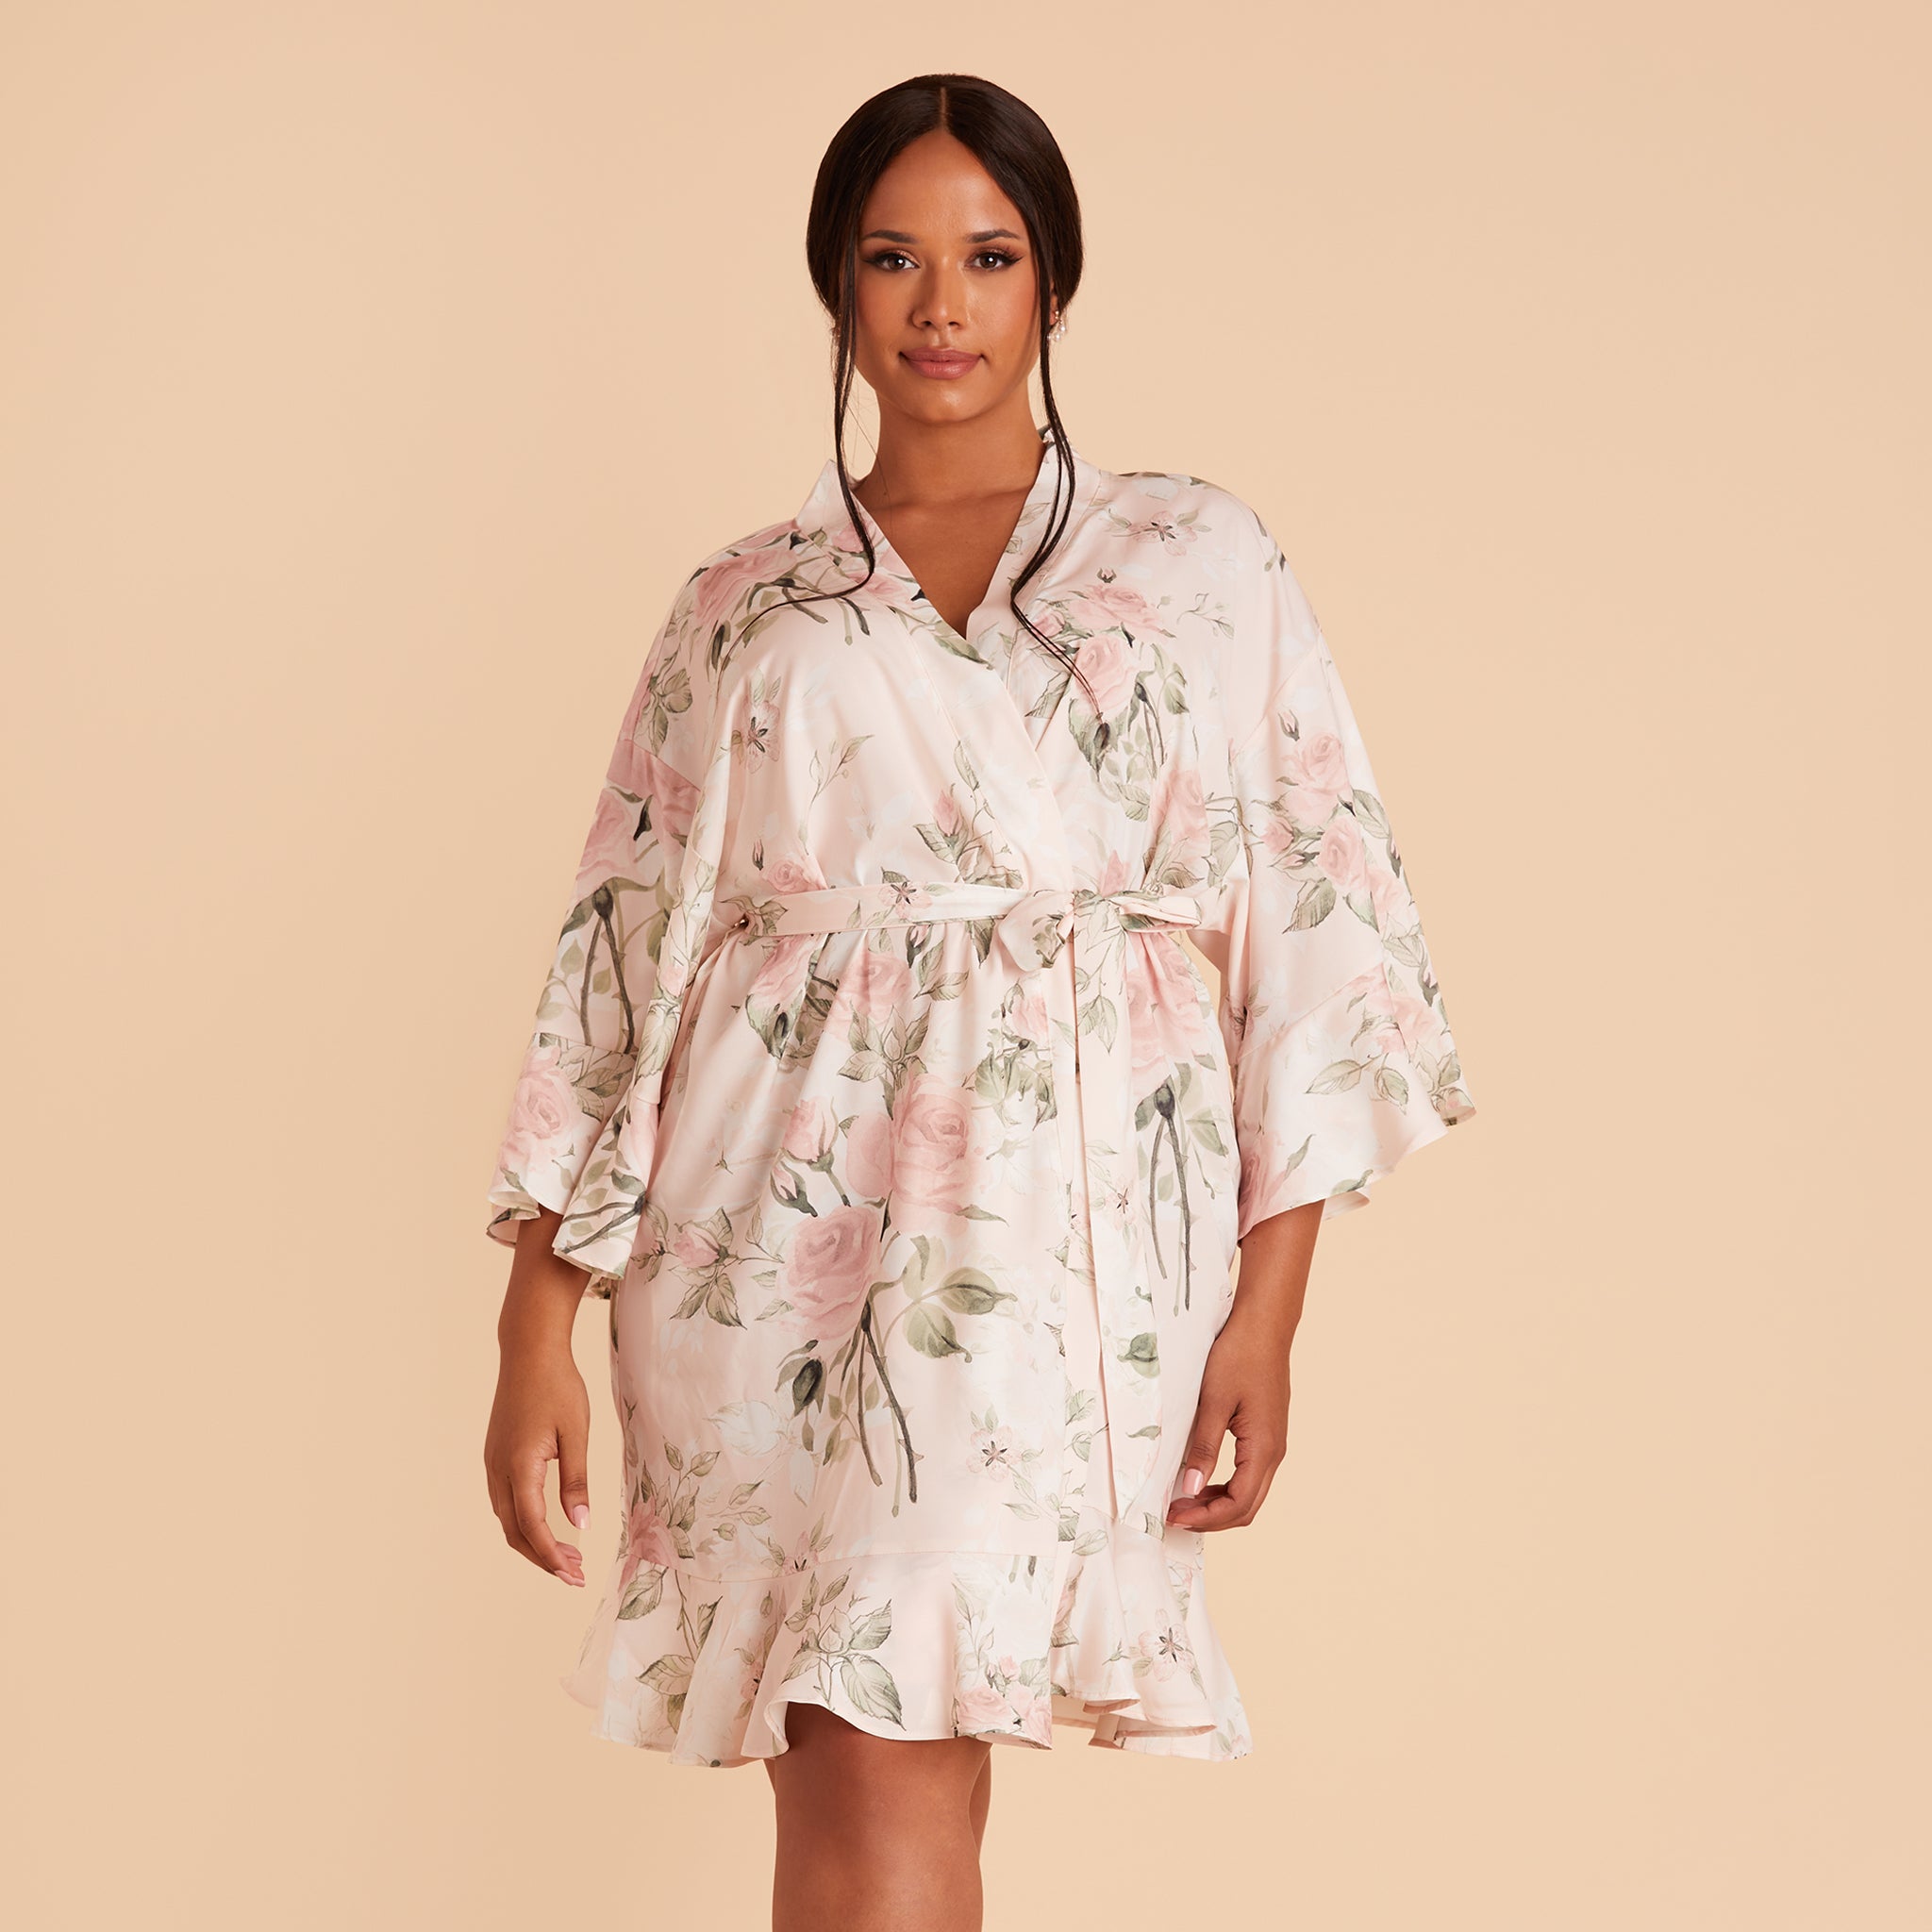 Kenny Ruffle Robe in Blush Garden Rose Floral by Birdy Grey, front view